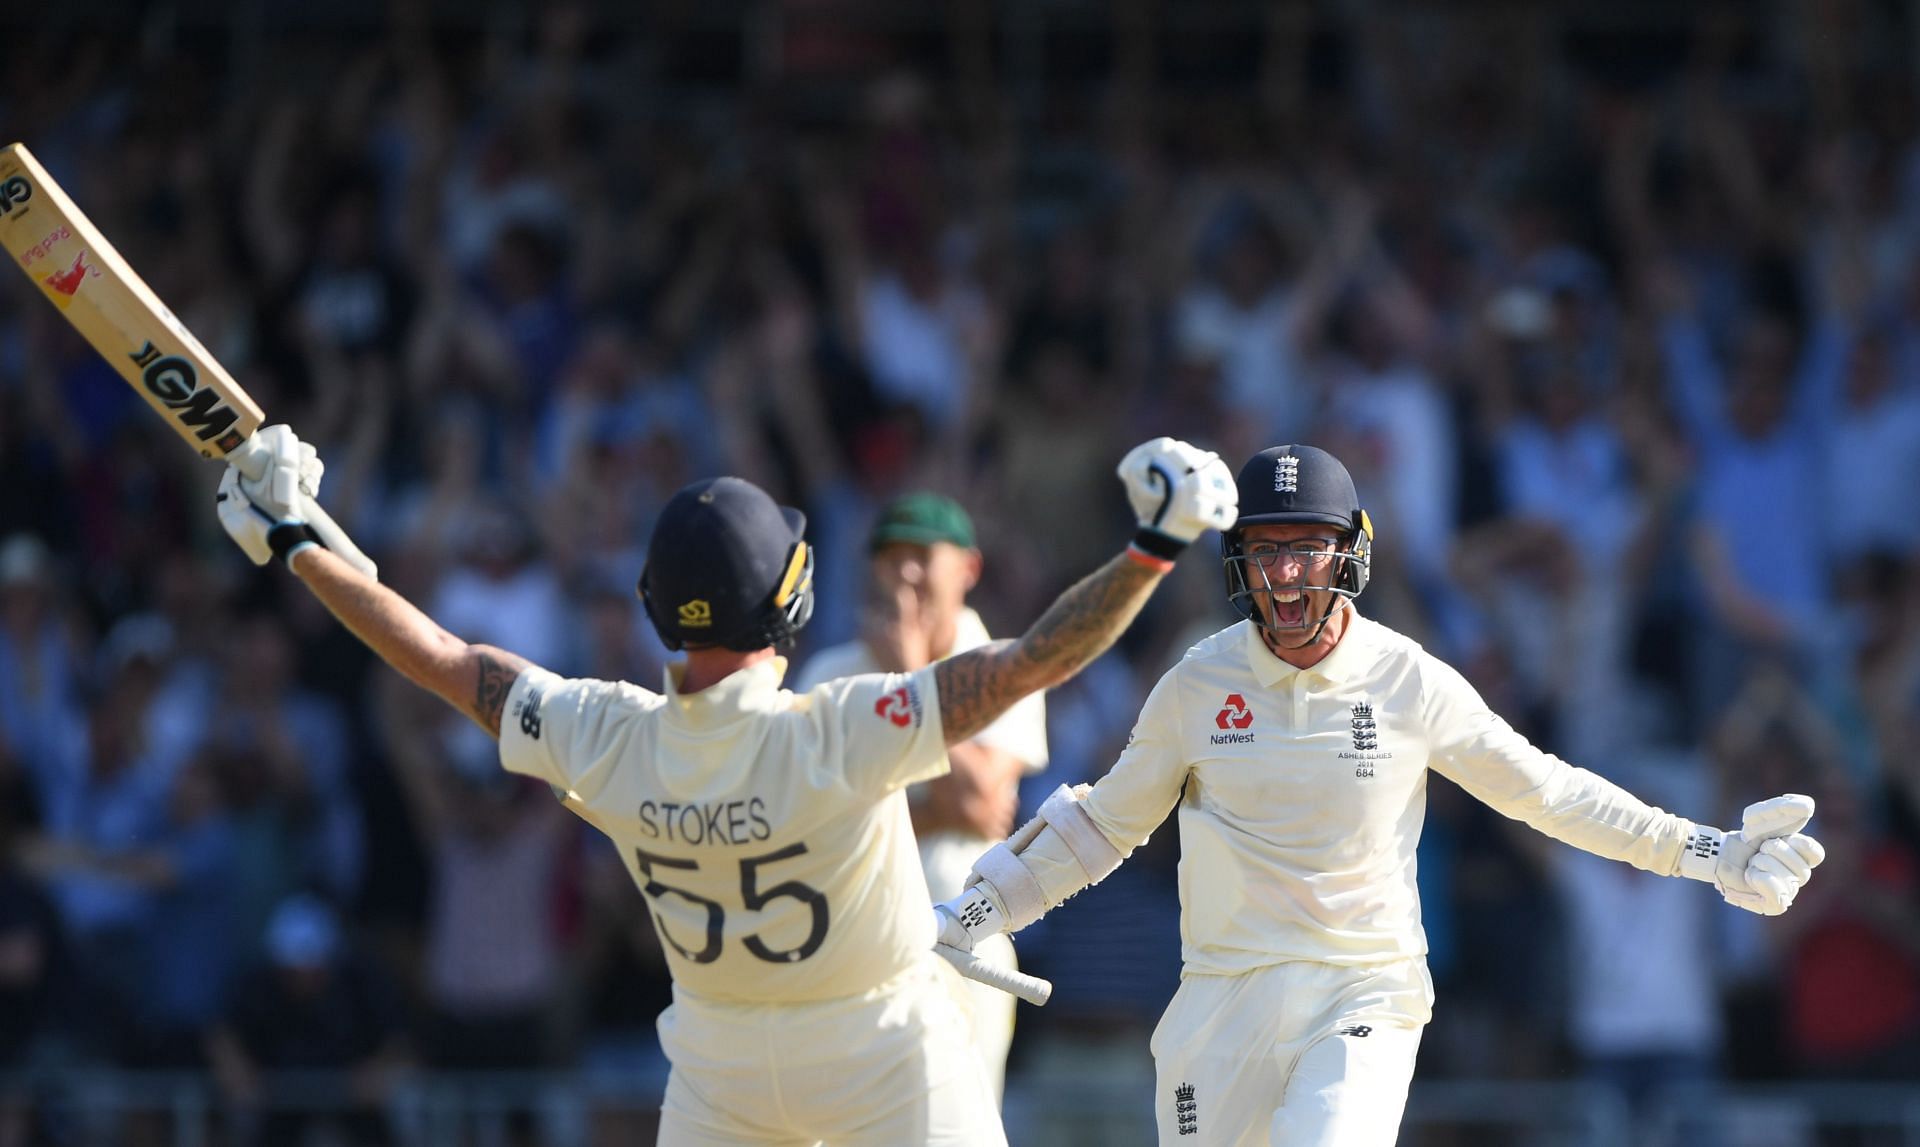 Ben Stokes and Jack Leach celebrate an unforgettable win. (Pic: Getty Images)